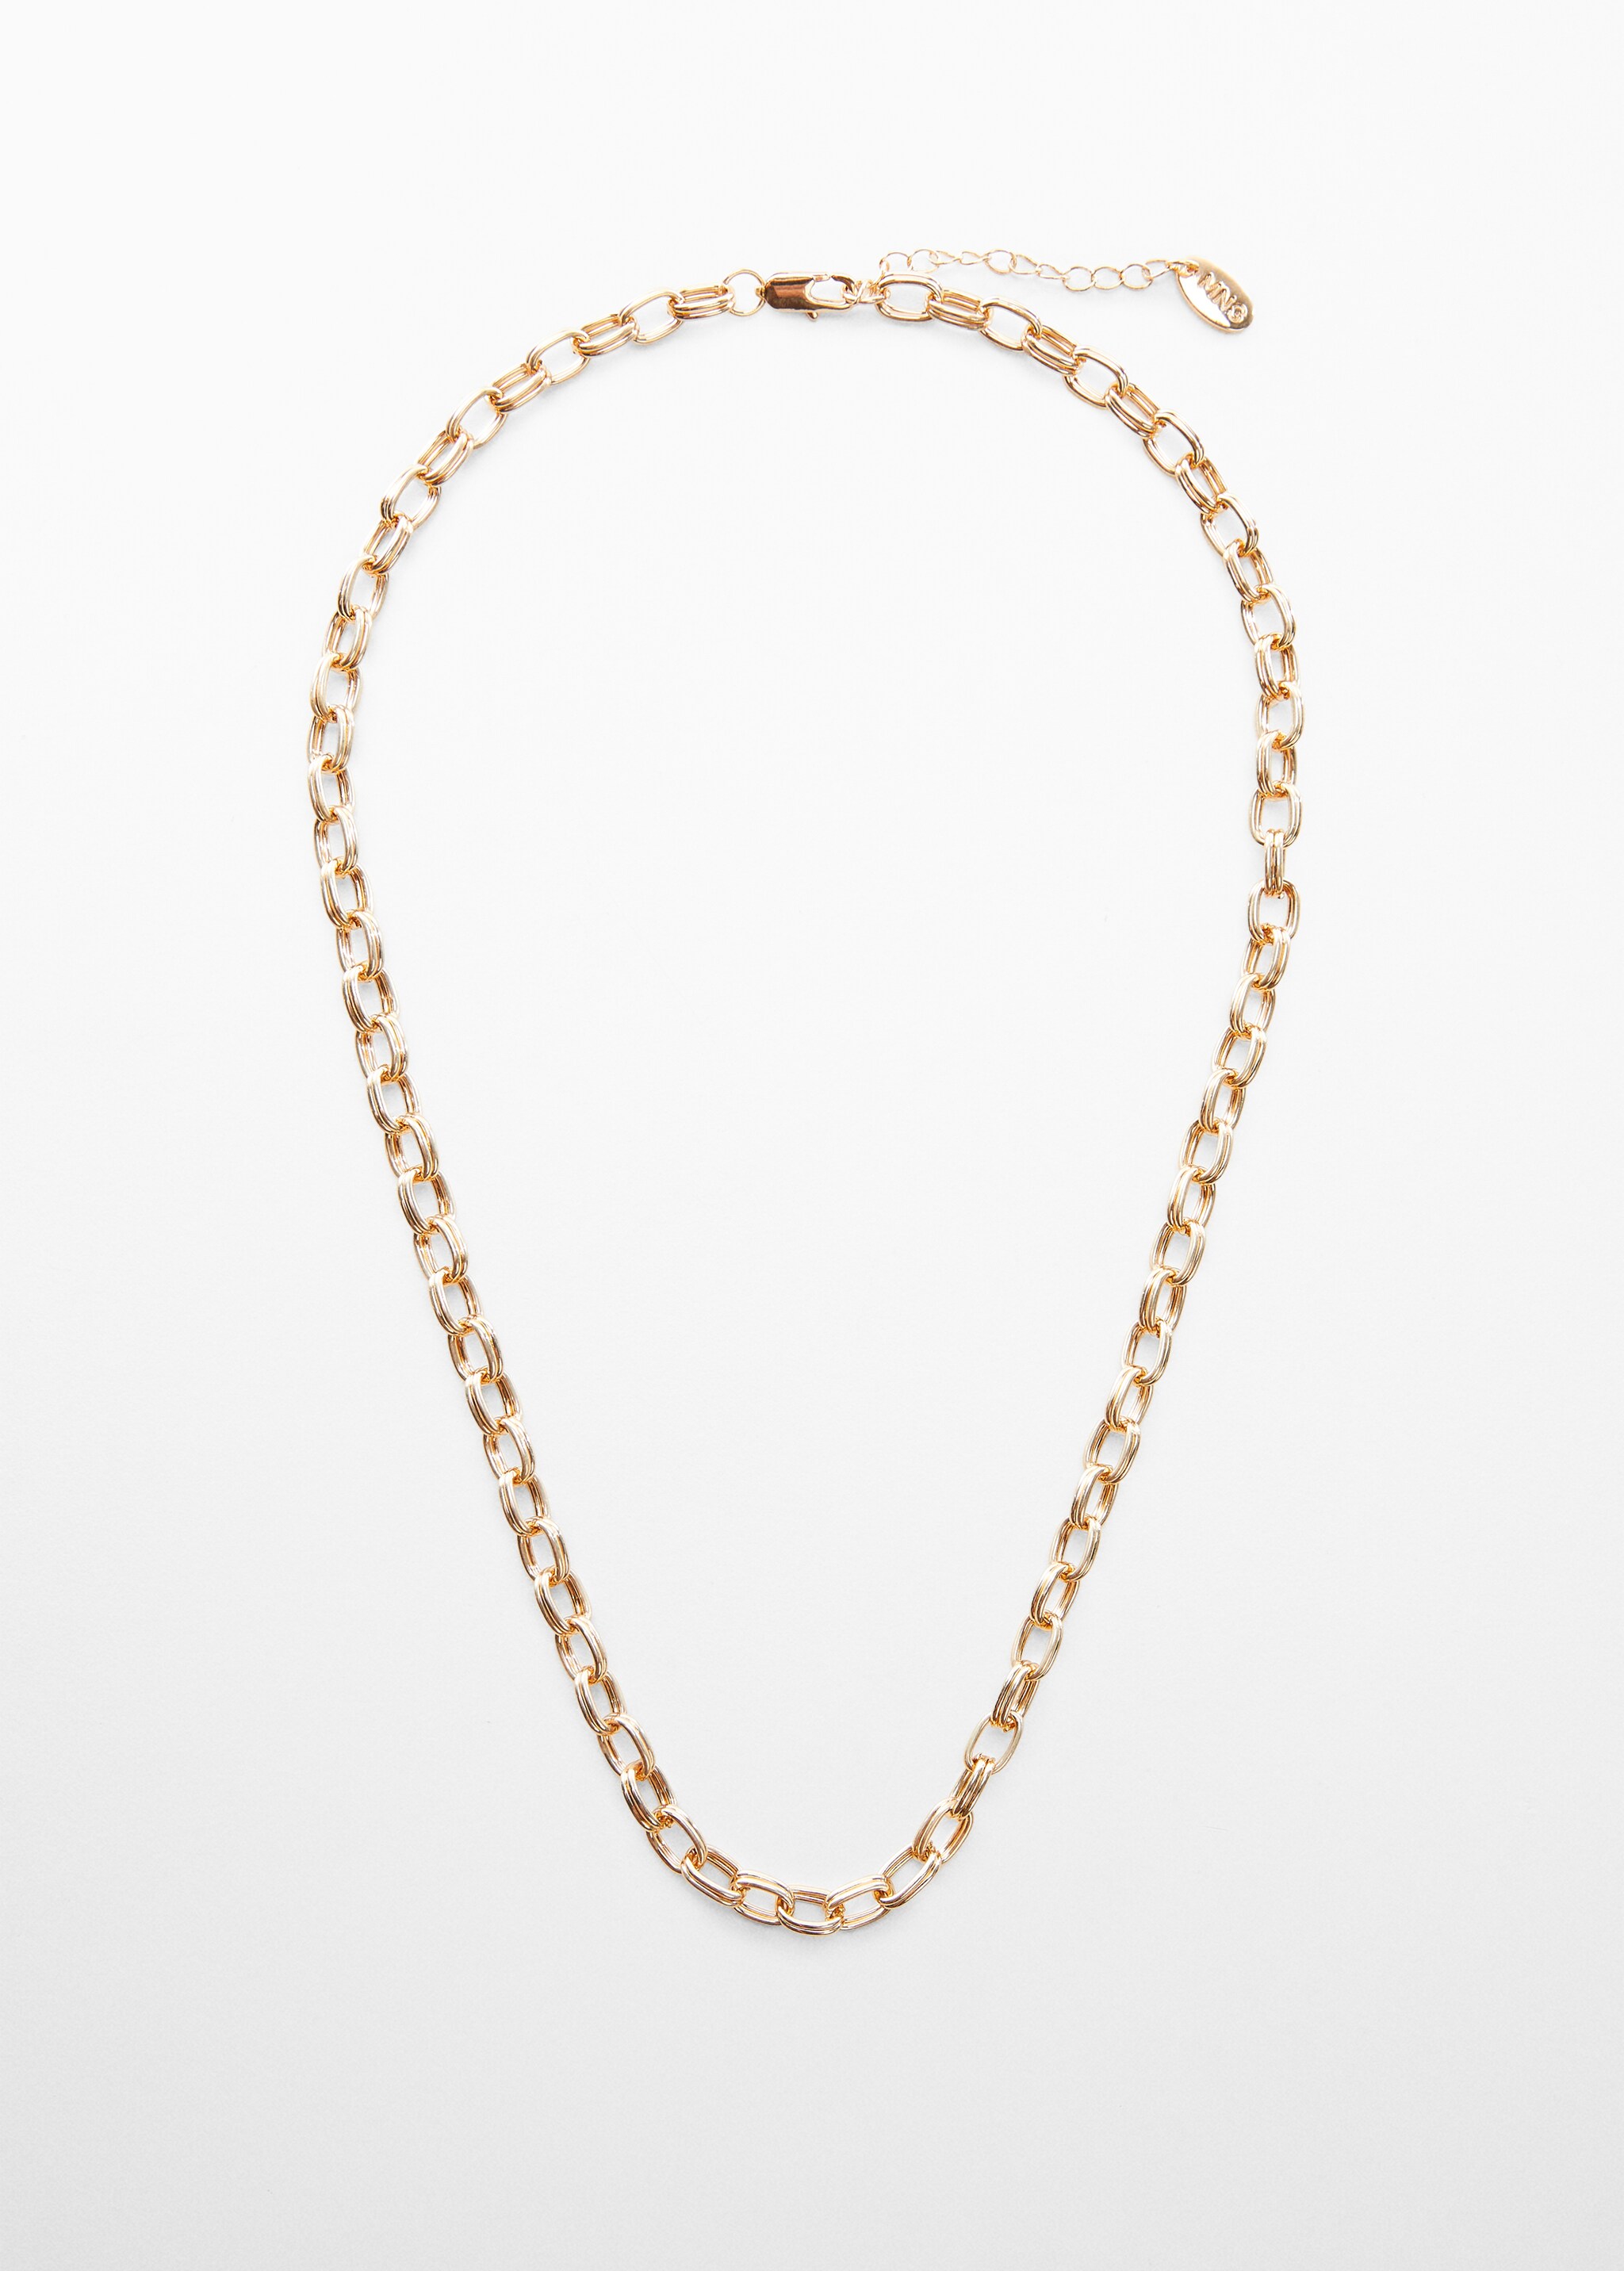 Slim chain necklace - Article without model